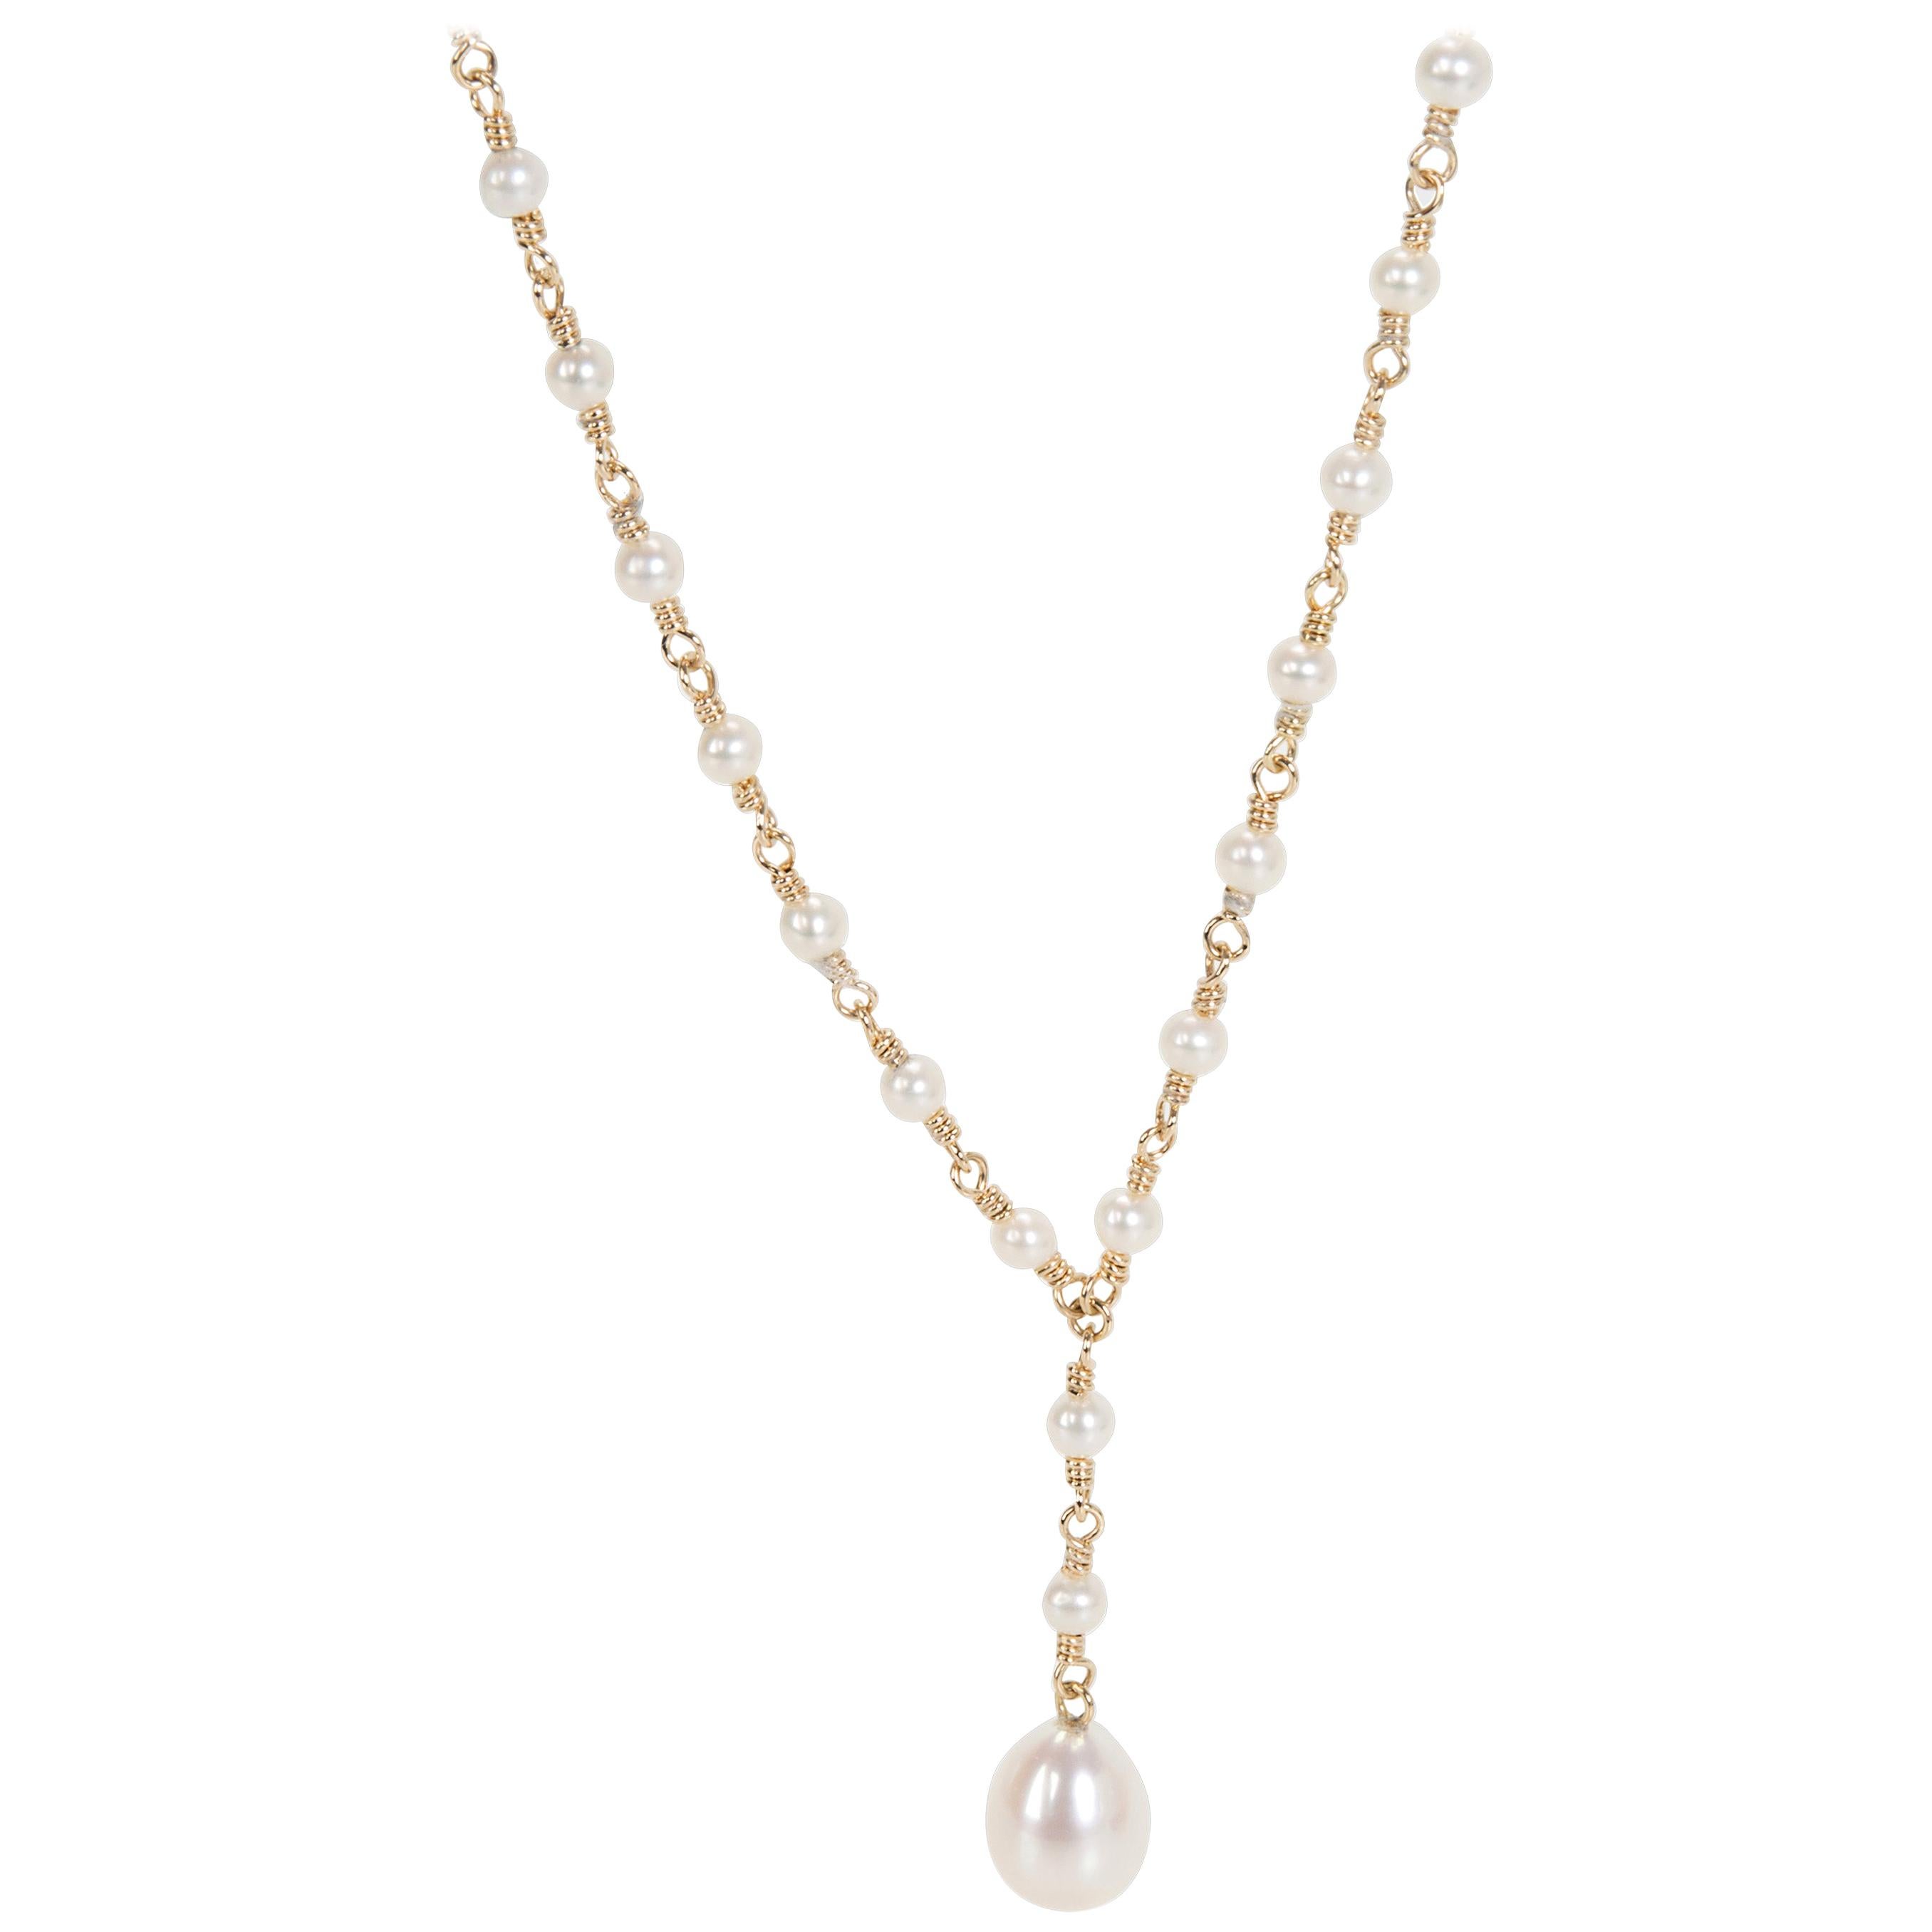 Tiffany & Co. Pearl Necklace in 18 Karat Yellow Gold